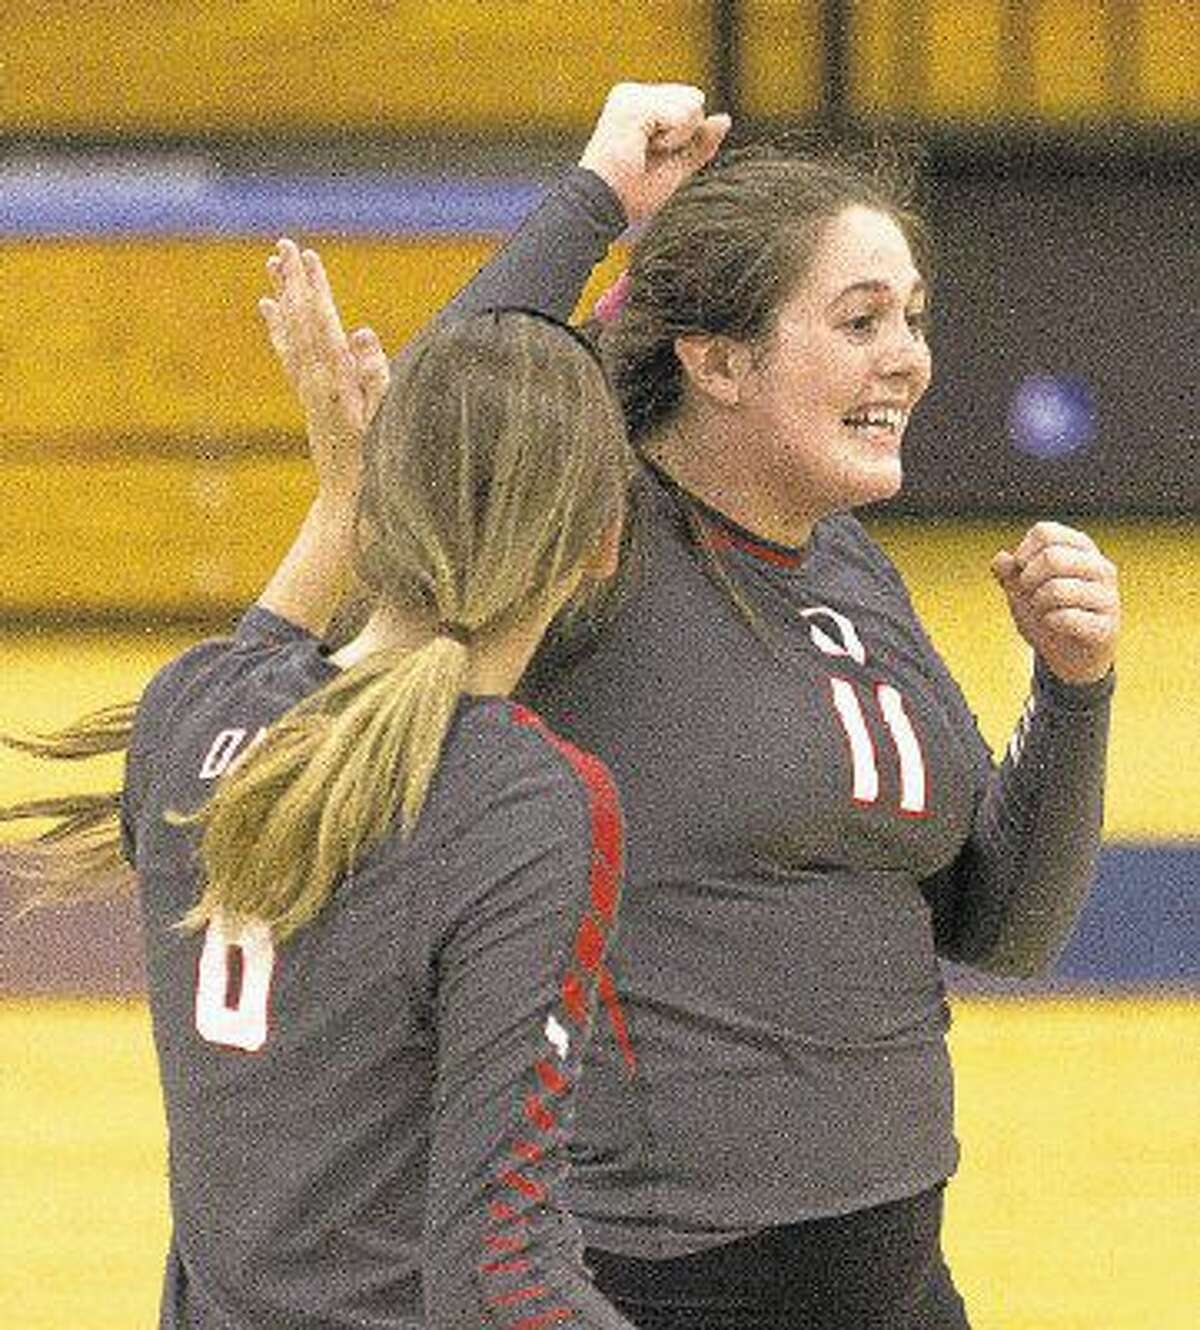 Oak Ridge's Carly Graham and Molly Russell celebrate a point in the third set of the gold bracket championship volleyball match during the Katy/Cy-Fair Nike Invitational. Go to HCNpics.com to purchase this photo and others like it.